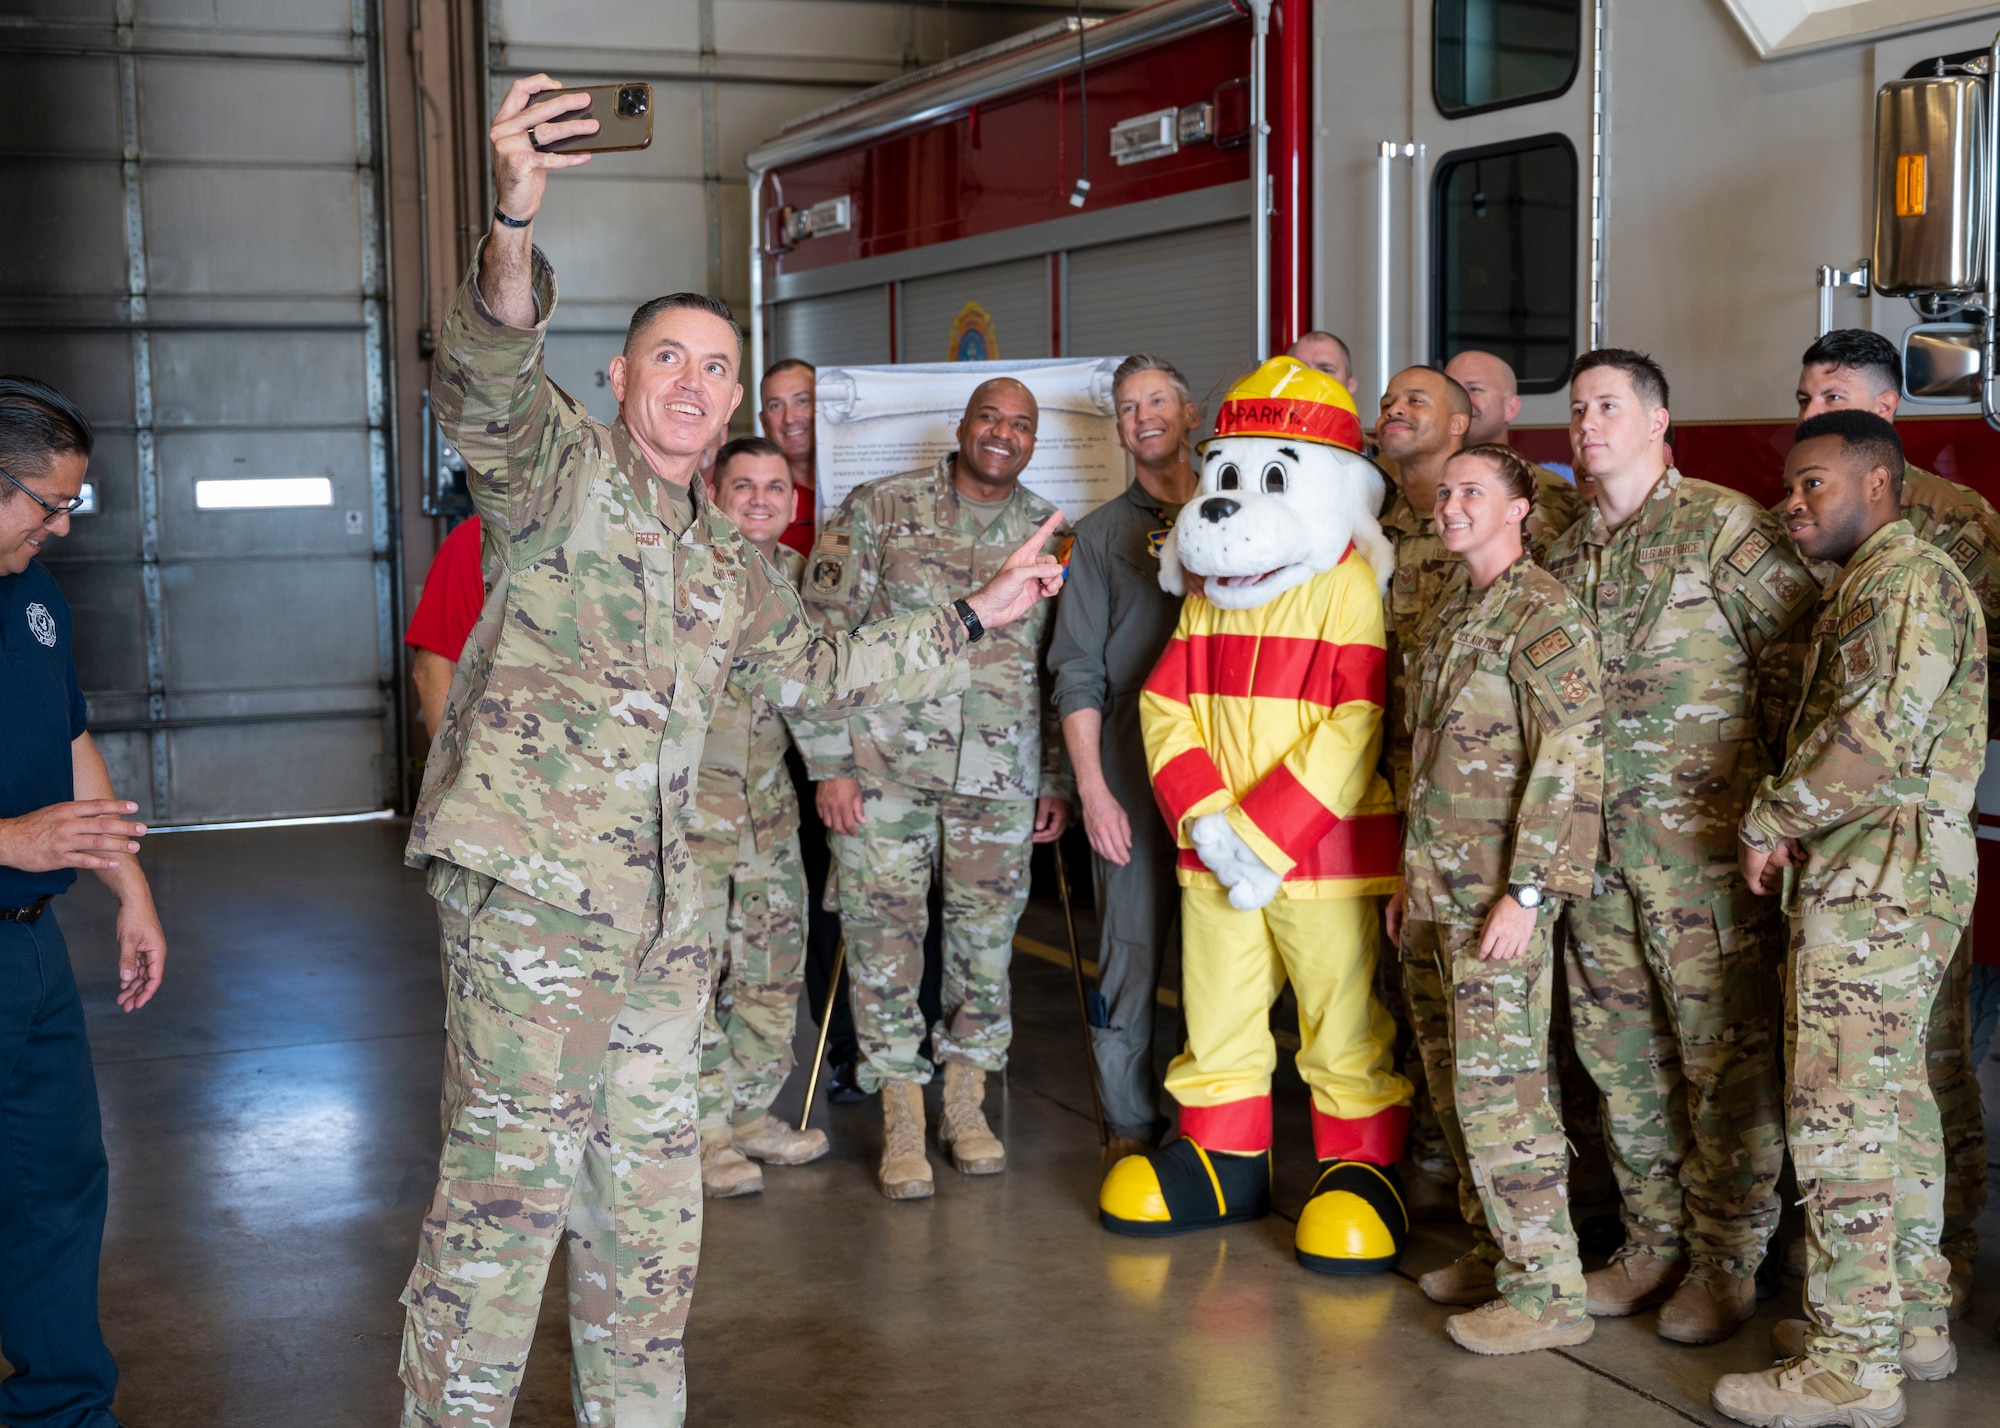 U.S. Air Force CMSgt. Jason Shaffer, 56th Fighter Wing command chief, takes a selfie with 56th Civil Engineer Squadron firefighters, Airmen and “Sparky” Oct. 7, 2022, at Luke Air Force Base, Arizona.